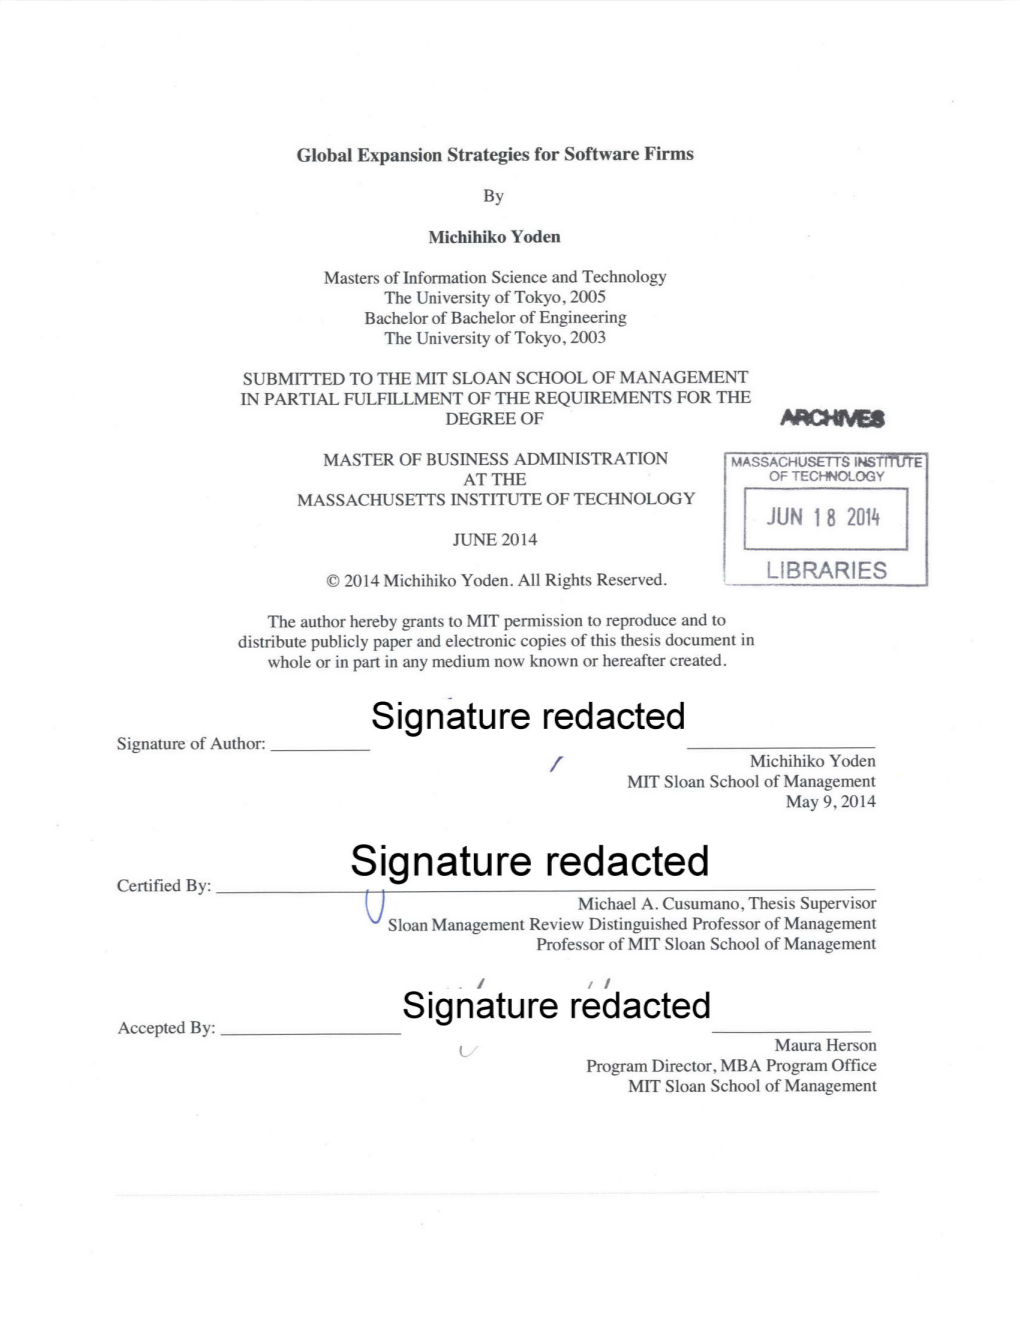 Signature Redacted Signature of Author: Michihiko Yoden MIT Sloan School of Management May 9, 2014 Signature Redacted Certified By: Michael A